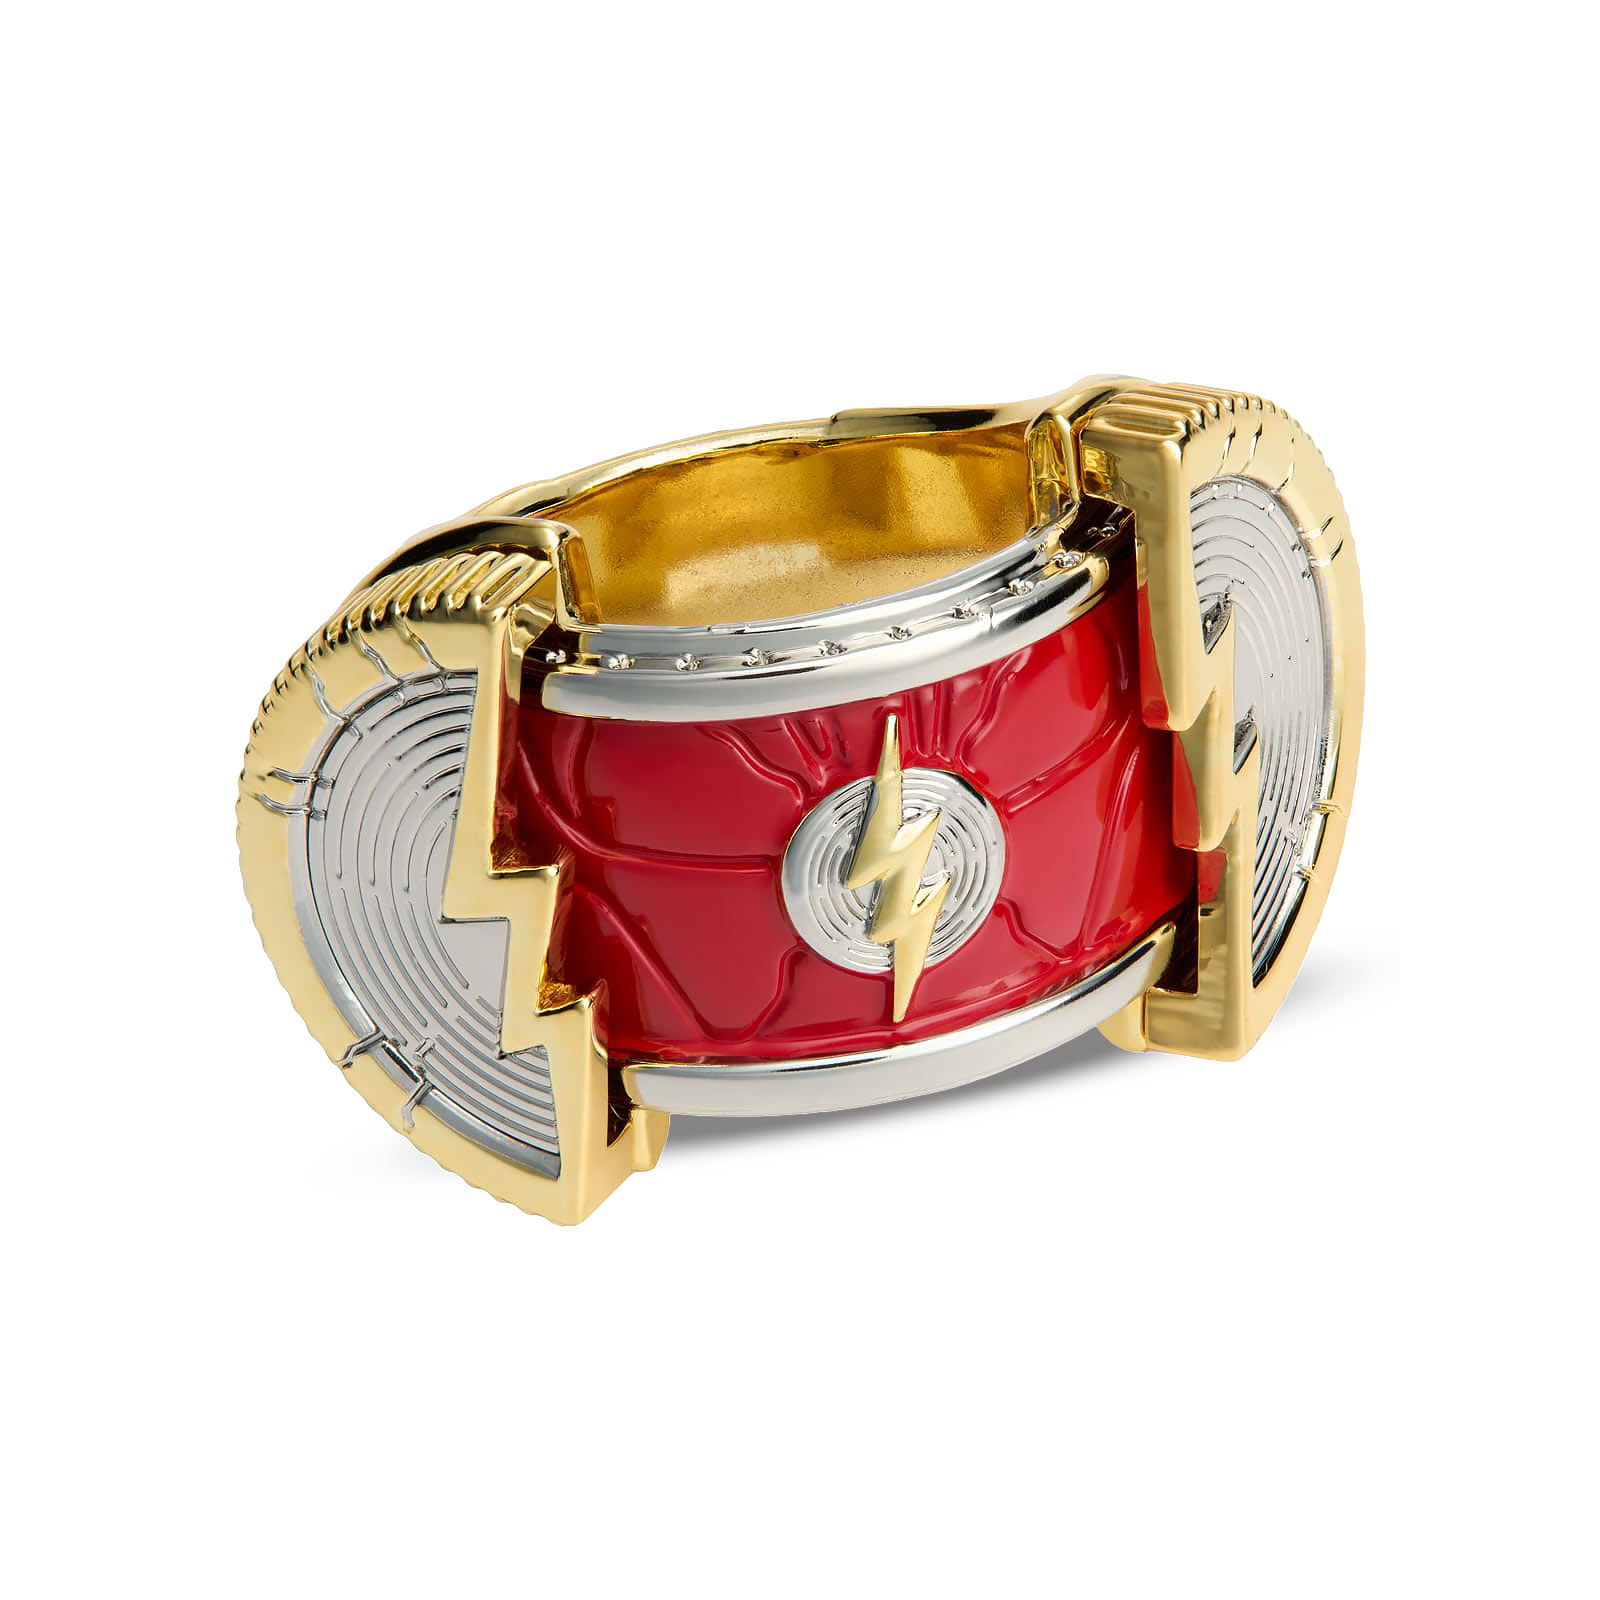 Flash - Ring Replica with Jewelry Display